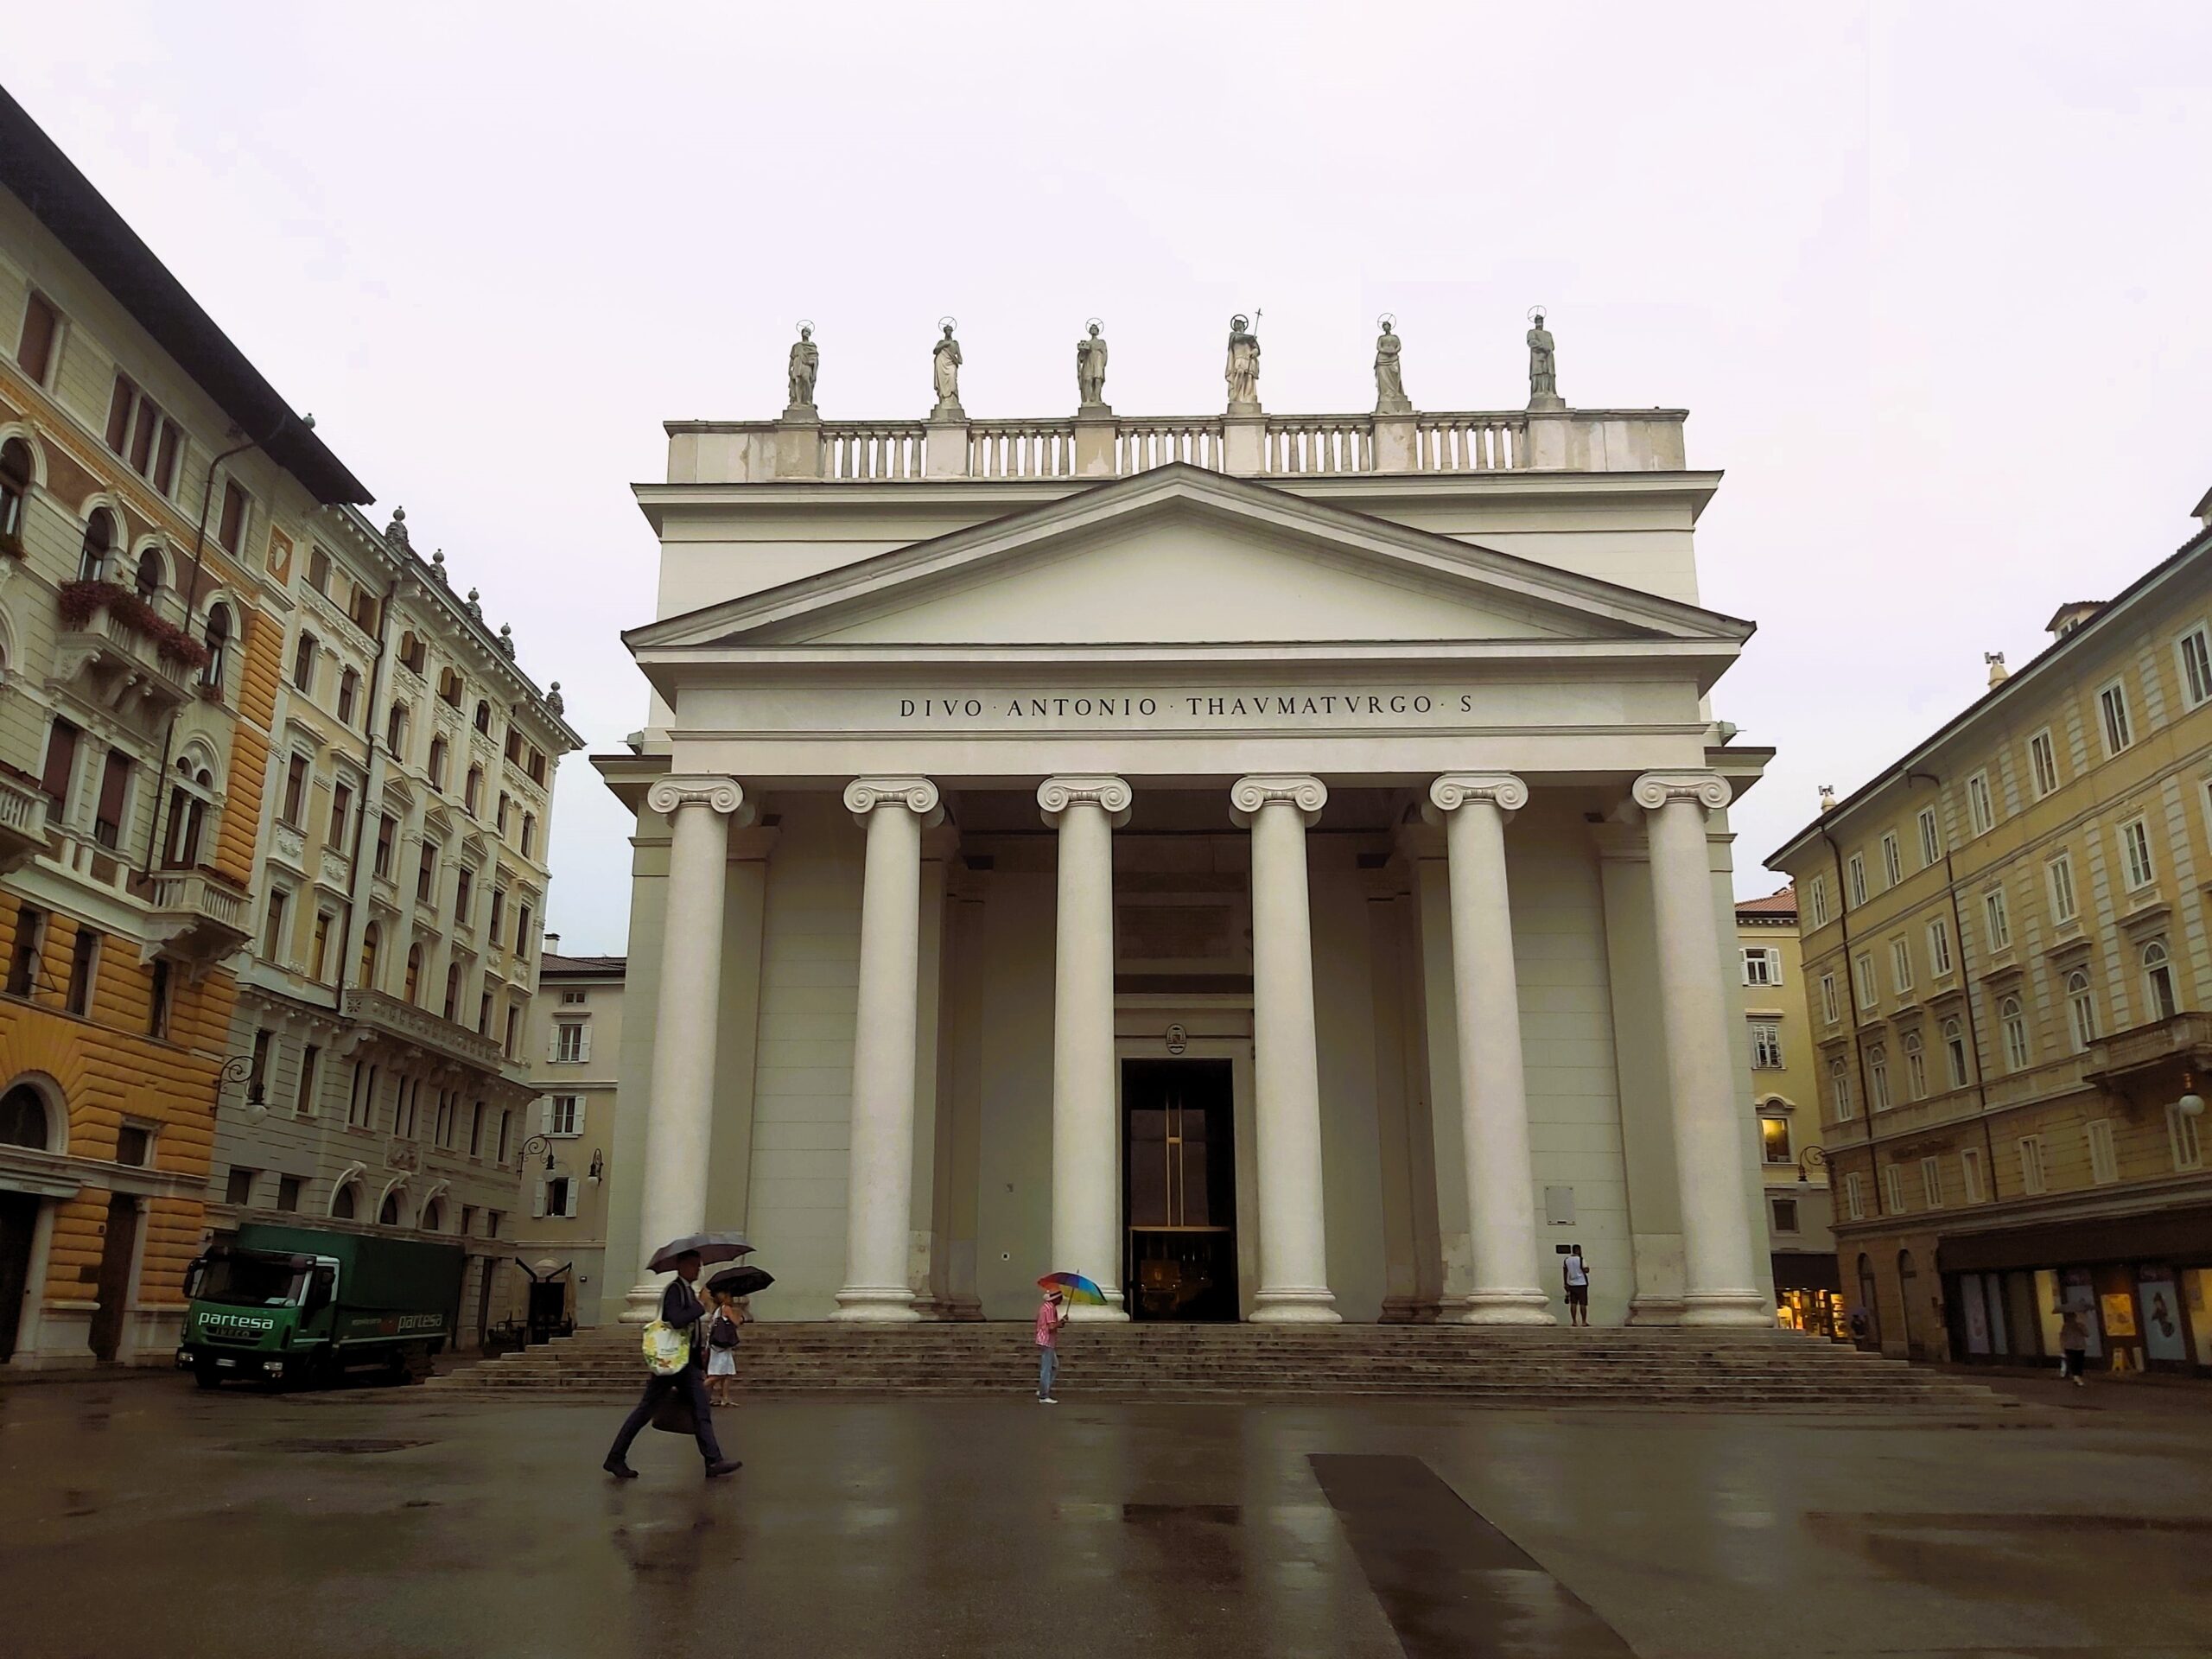 The columned front of the neoclassical church of Sant’Antonio Nuovo in Trieste, Italy